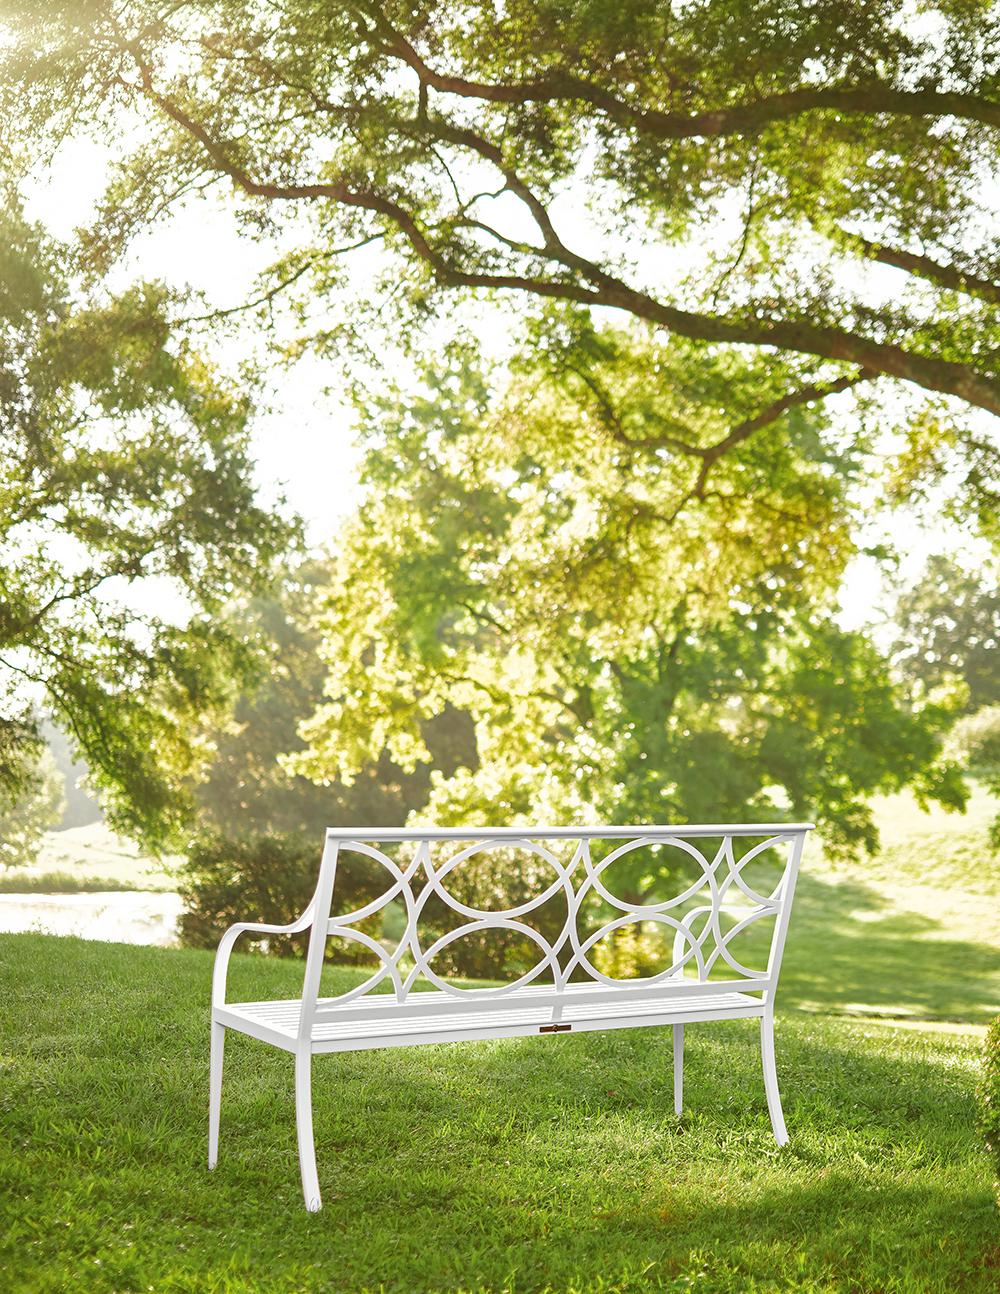 The McKinnon and Harris Three-Seater Virginia Bench with Keswick Back in Classic white finish. High performance outdoor aluminum furniture for estate, garden, and yacht. A bench is the foundational piece for a garden. Our Keswick back is a design of